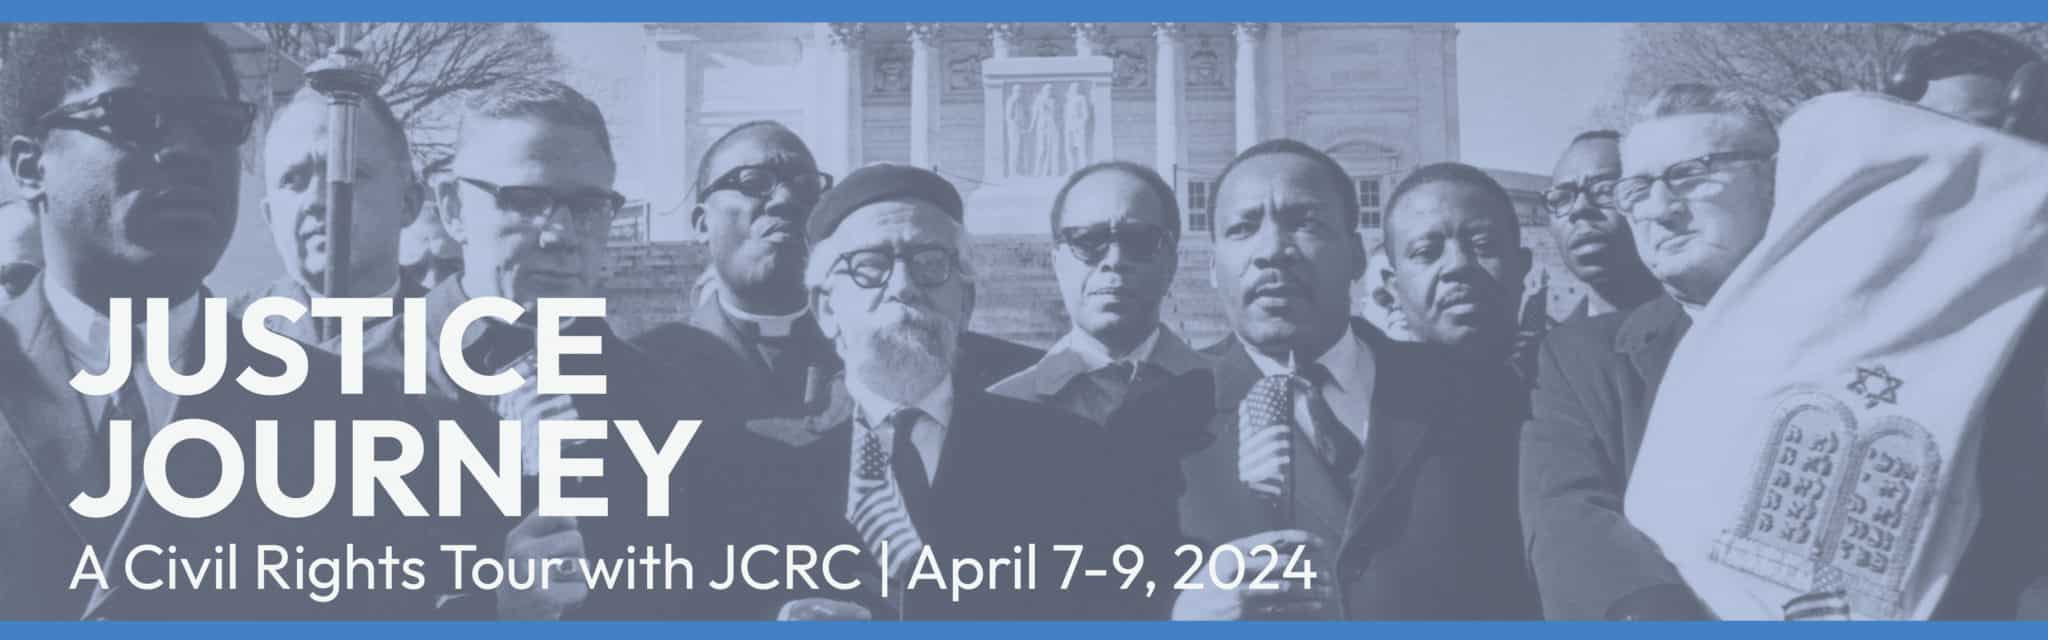 Justice Journey – A Civil Rights Tour With JCRC Banner